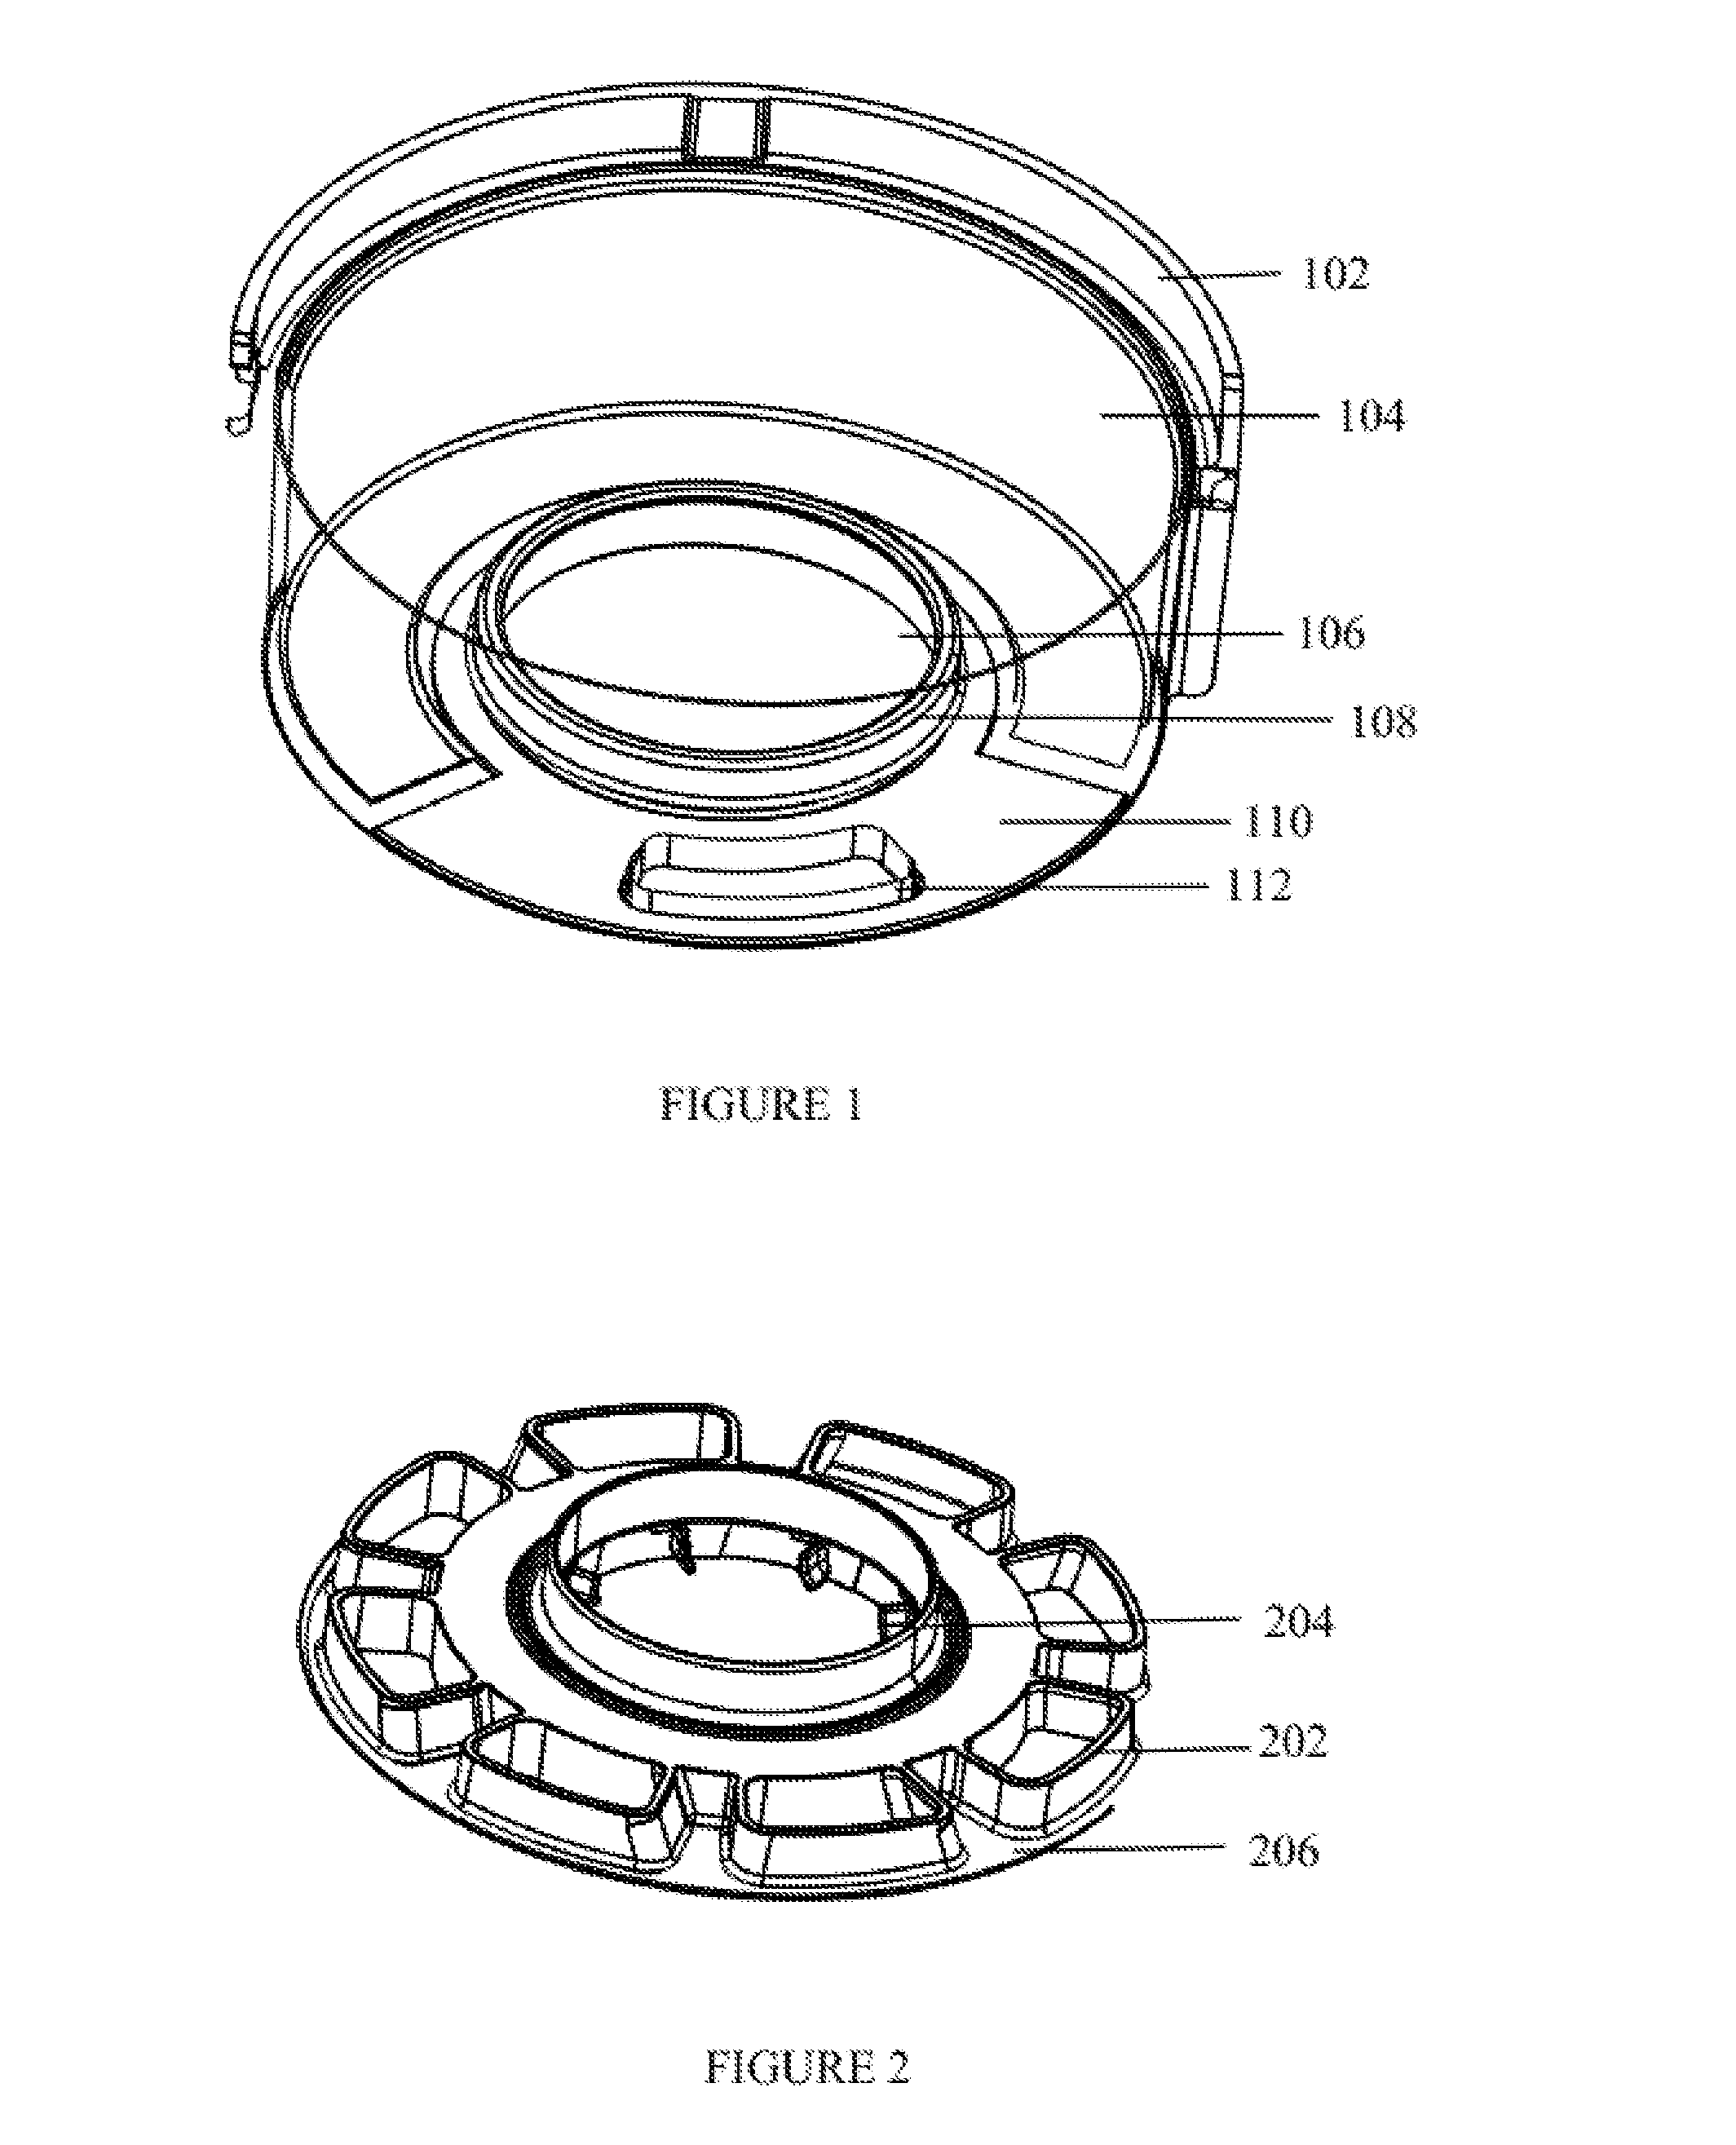 Dry flour dispensing apparatus and using the same for a food preparation appliance